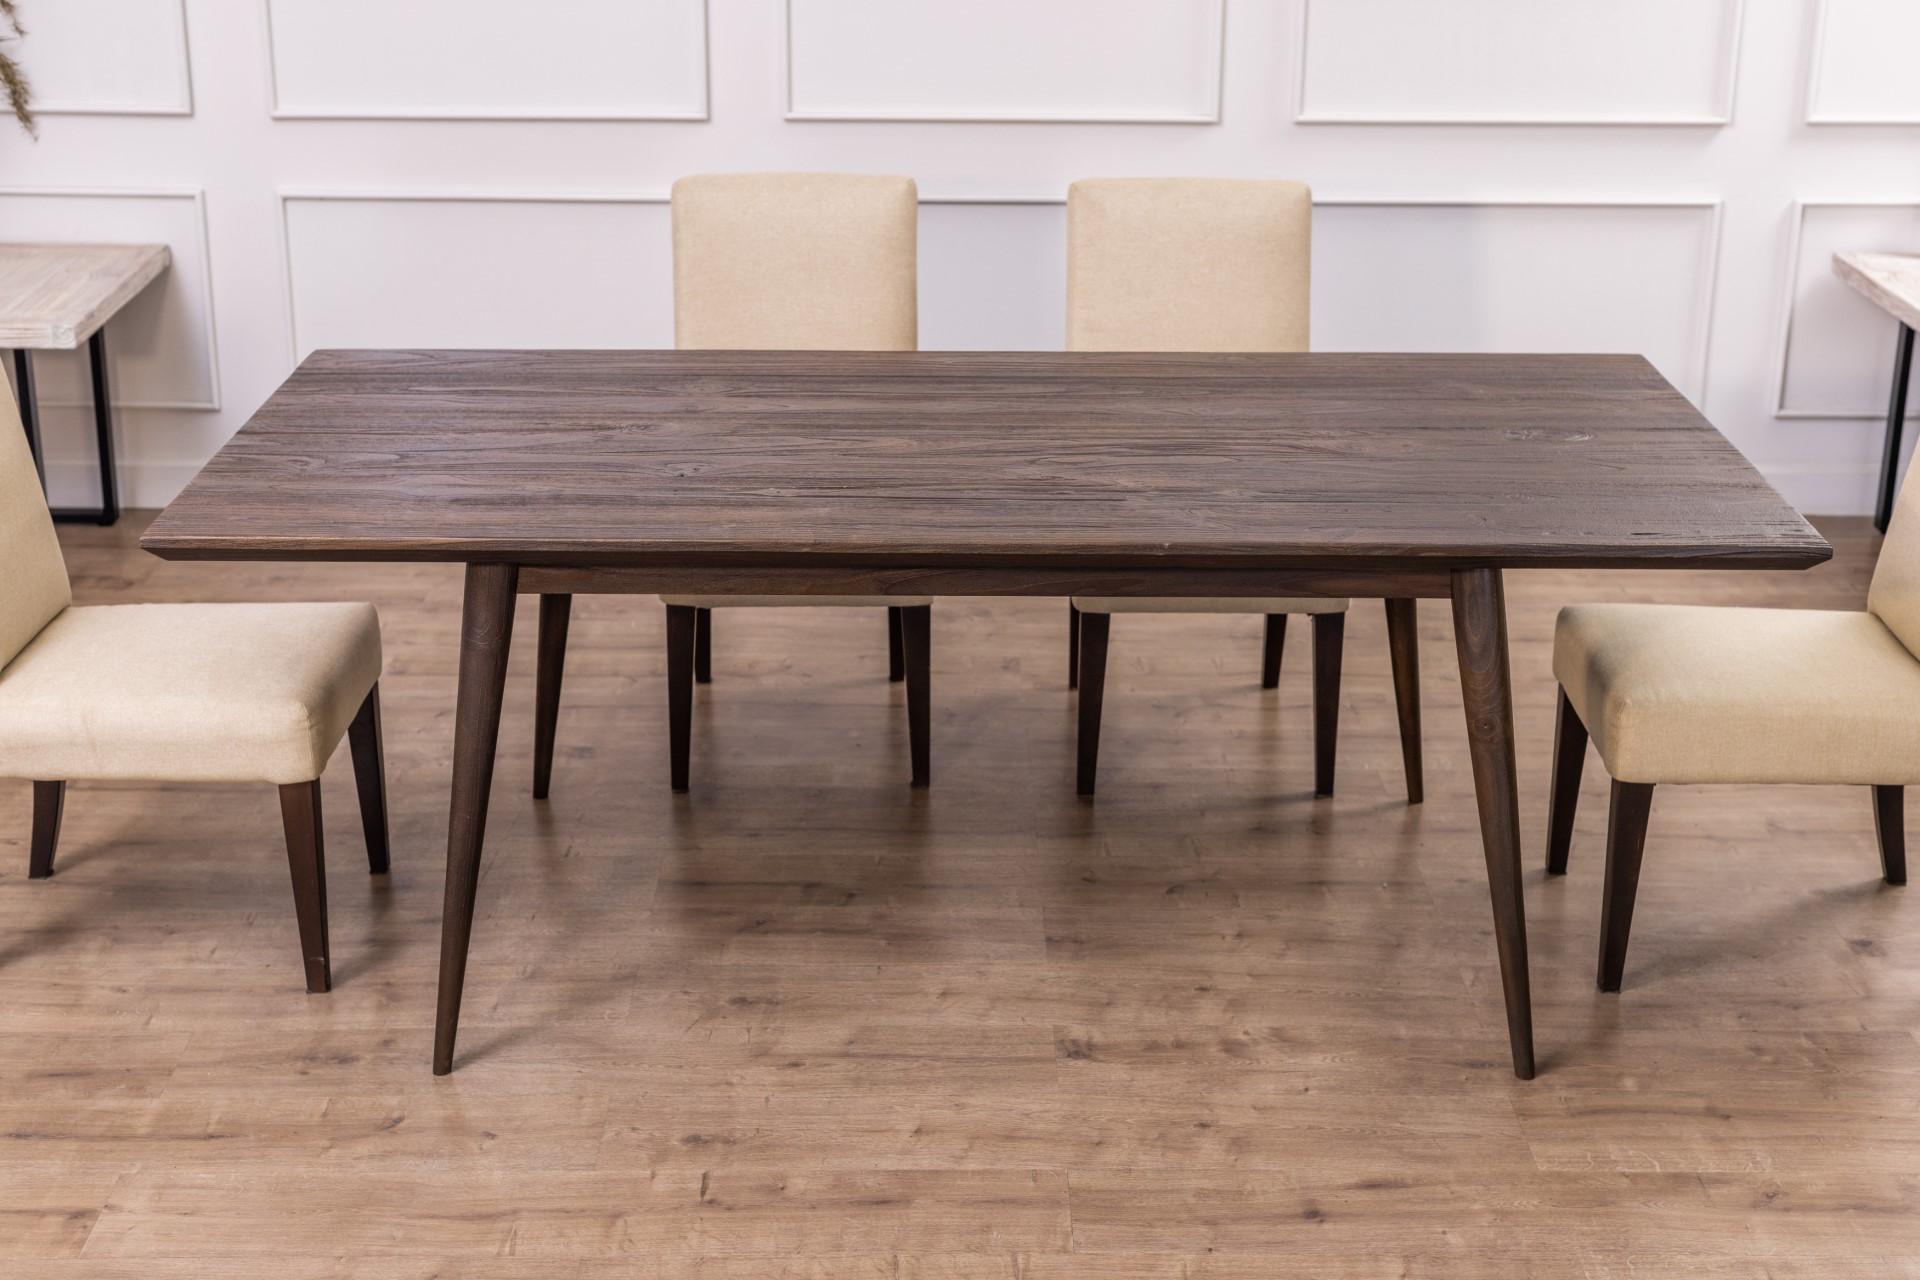 This table highlights classic mid-century styling to create a truly unique piece. The hand-crafted wooden legs support the beautifully handmade natural hardwood top with a graceful overhang and chamfered detail. The modern vintage style makes this